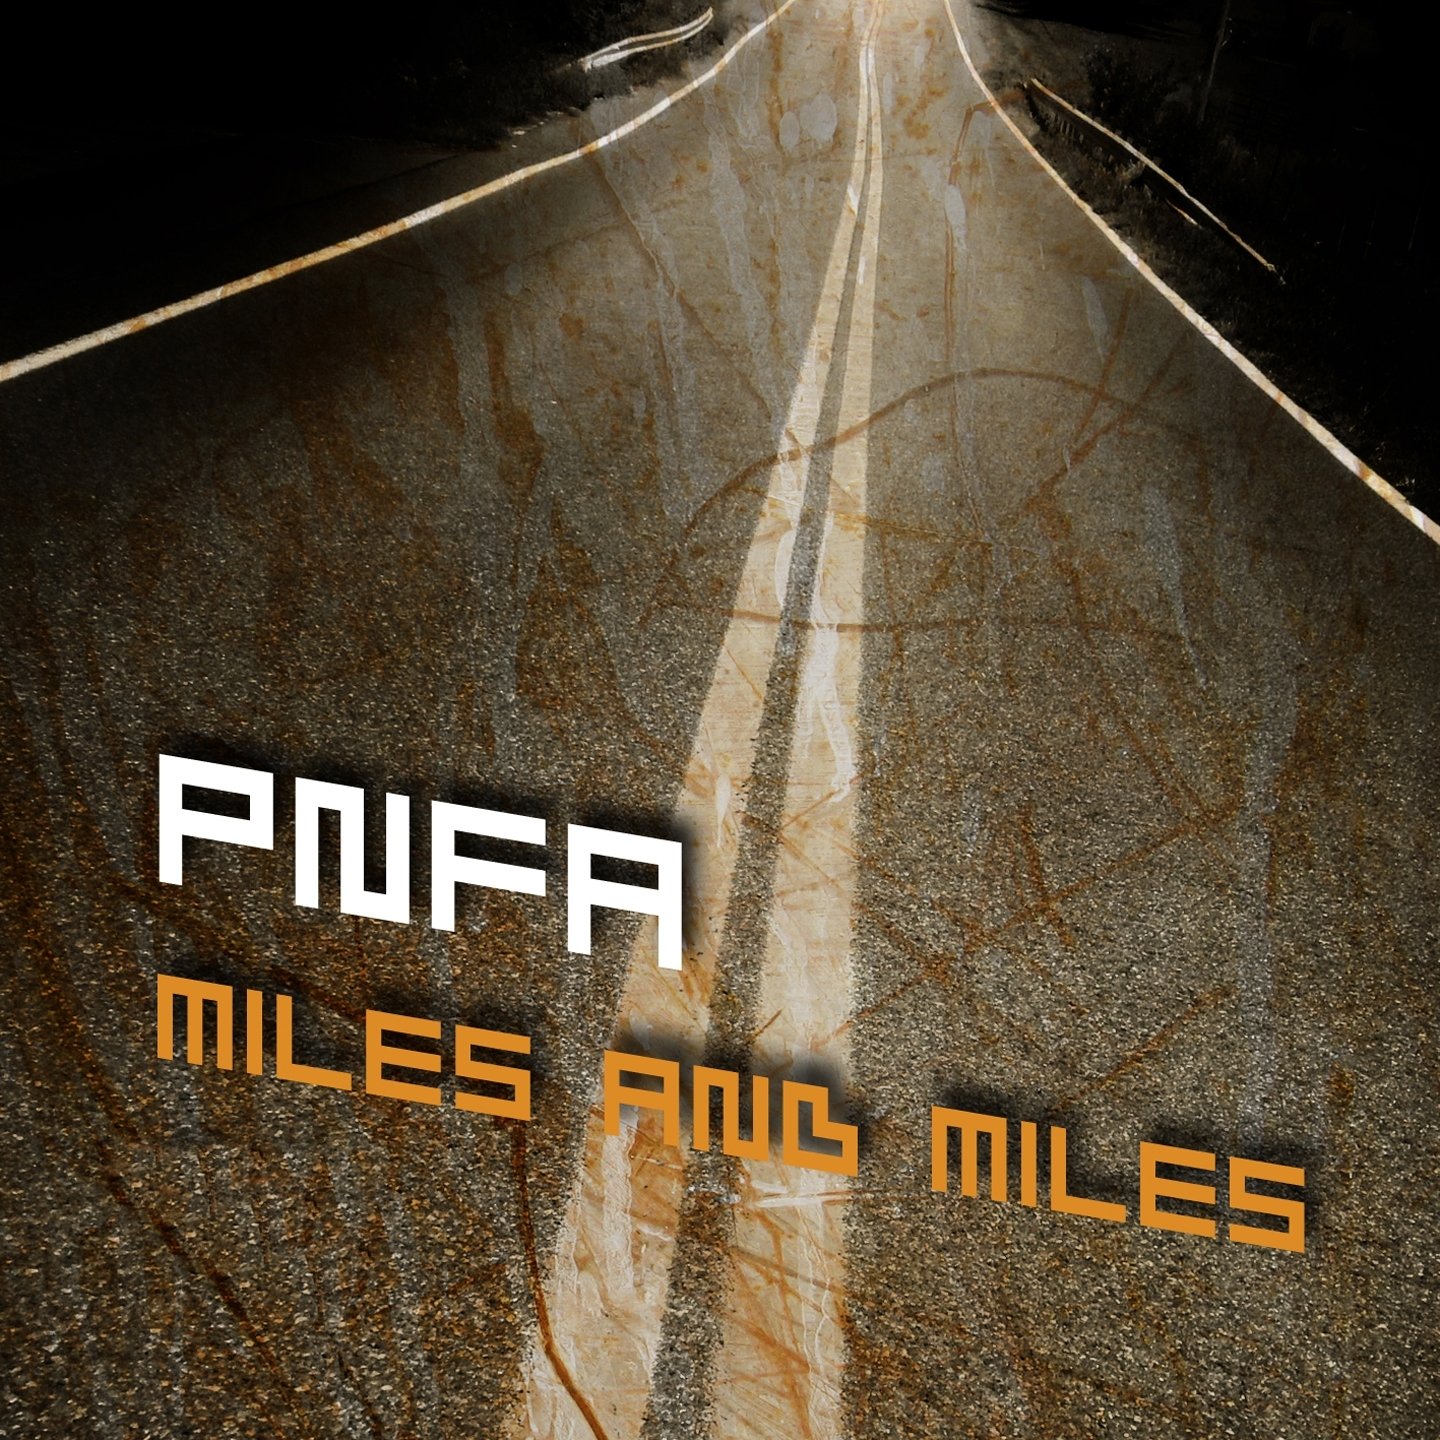 Miles long. Miles smiles. PNFA. See for Miles and Miles фото. Immerge.